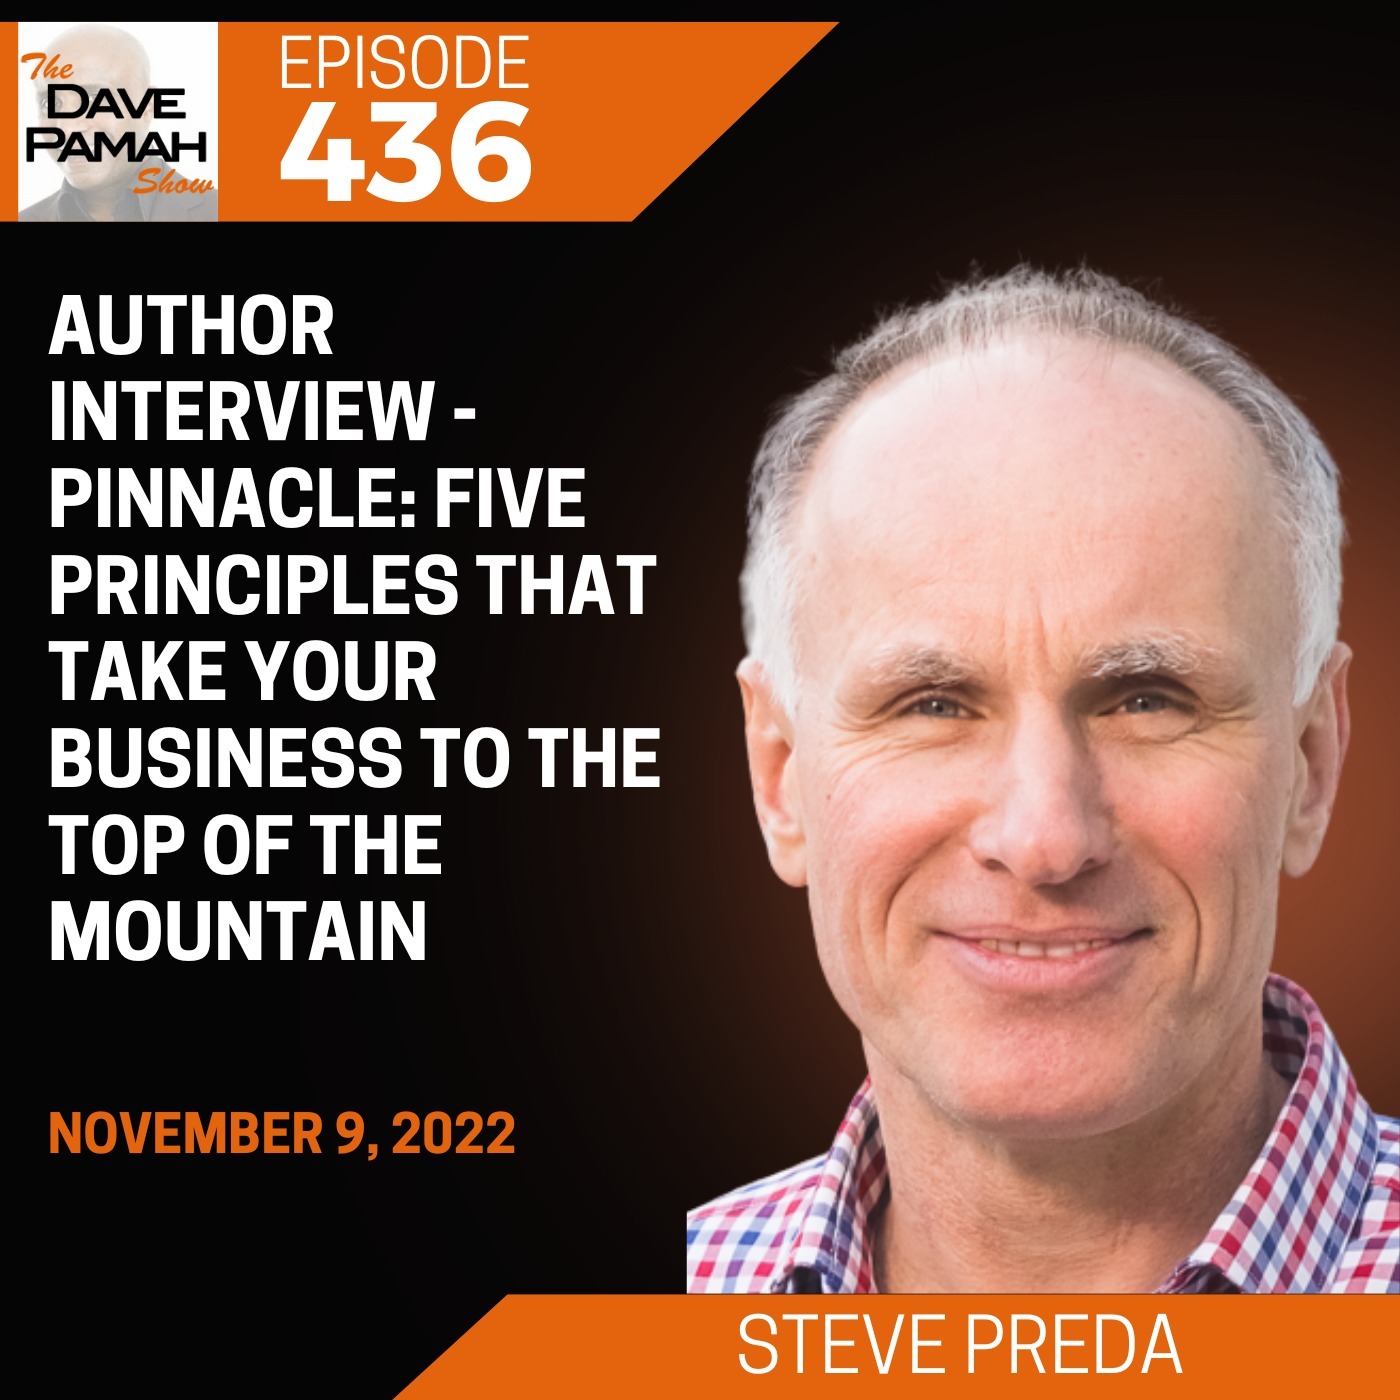 Author Interview - Pinnacle: Five Principles that Take Your Business to the Top of the Mountain with Steve Preda Image